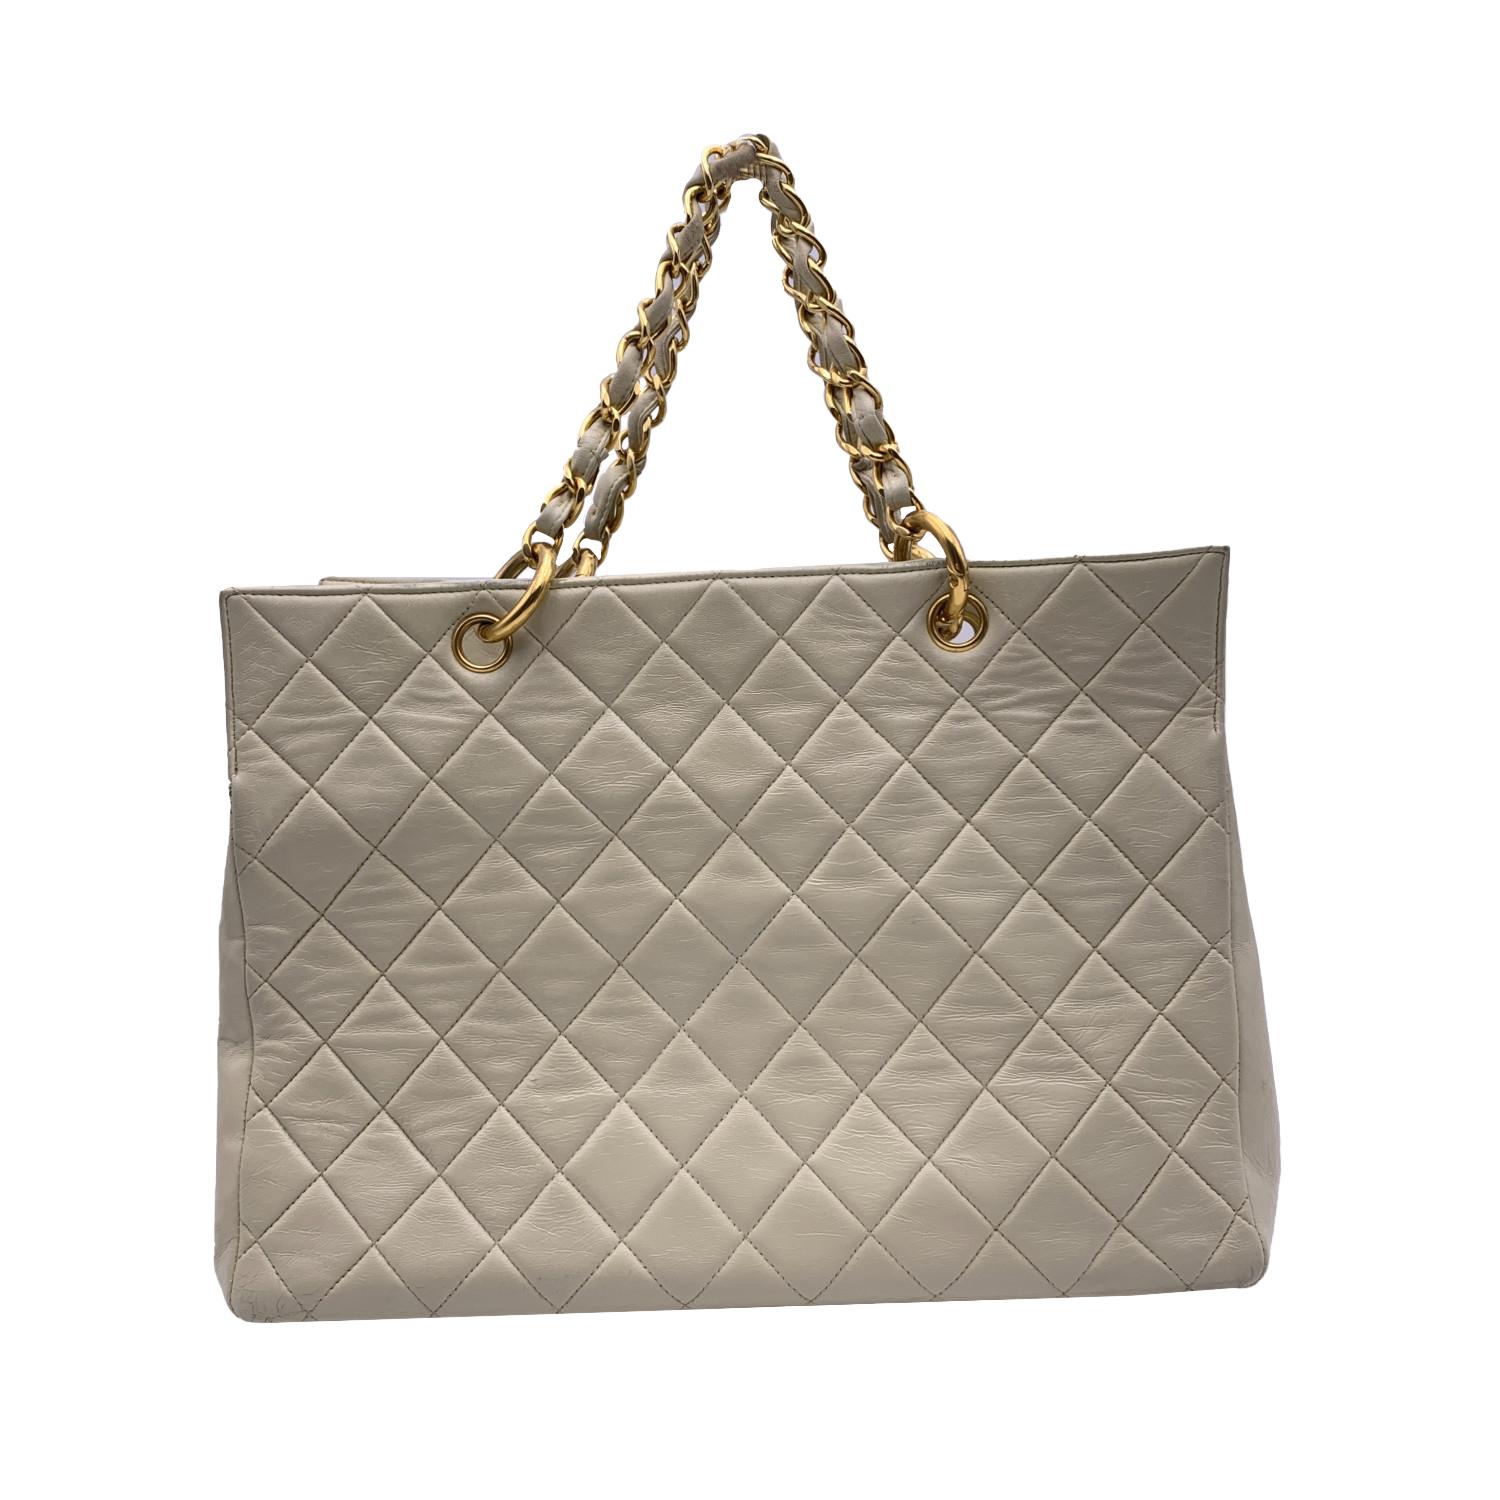 Chanel Vintage Beige Quilted Leather GST 1997 Grand Shopping Tote In Good Condition For Sale In Rome, Rome